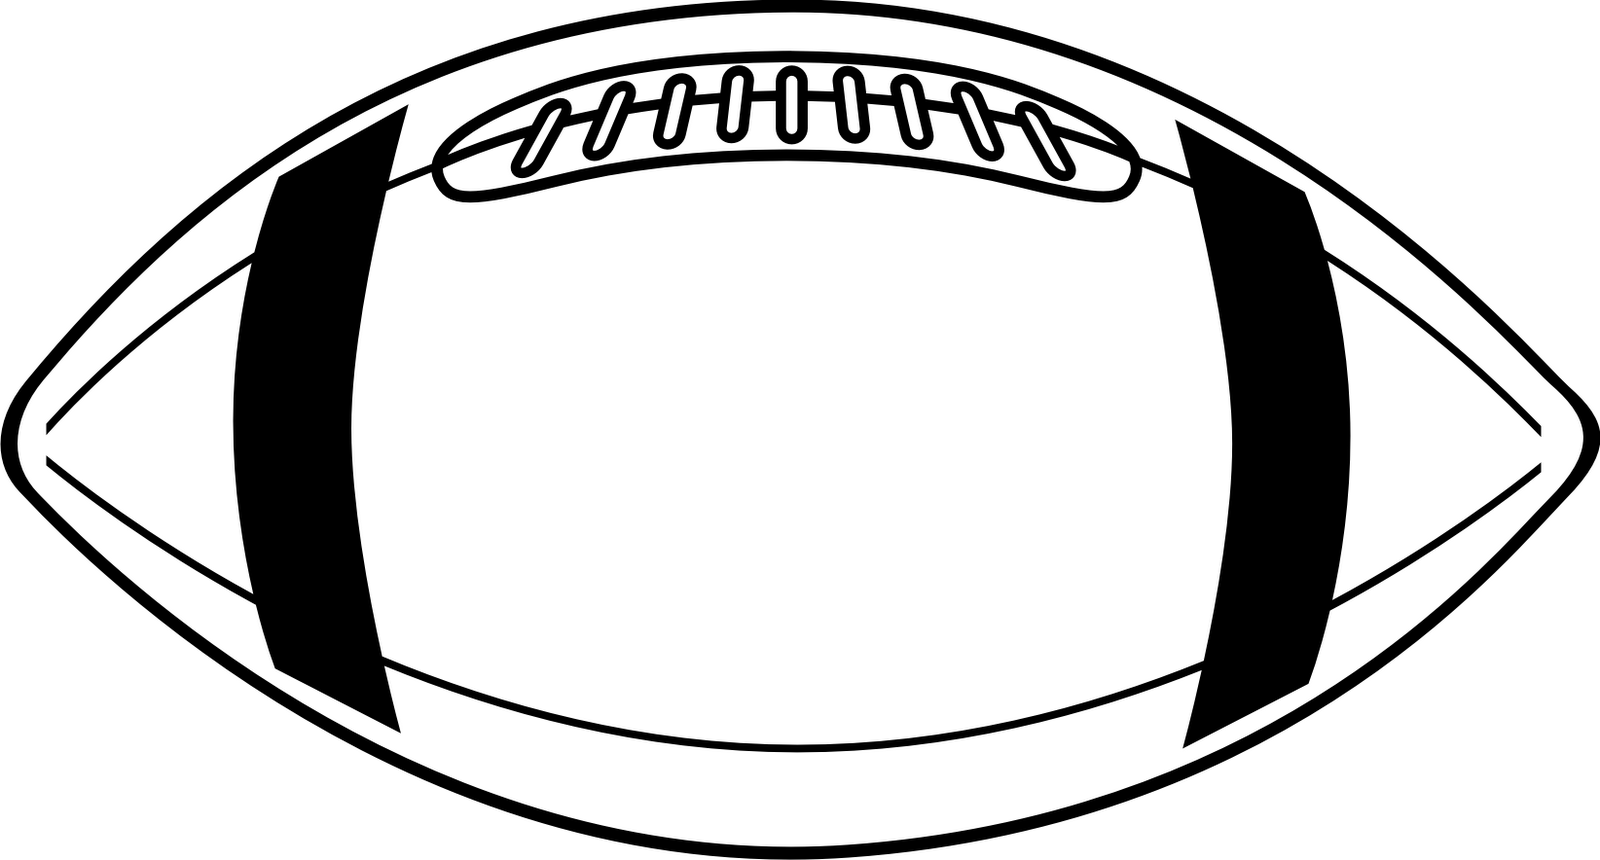 Football Player Clipart | Clipart Panda - Free Clipart Images